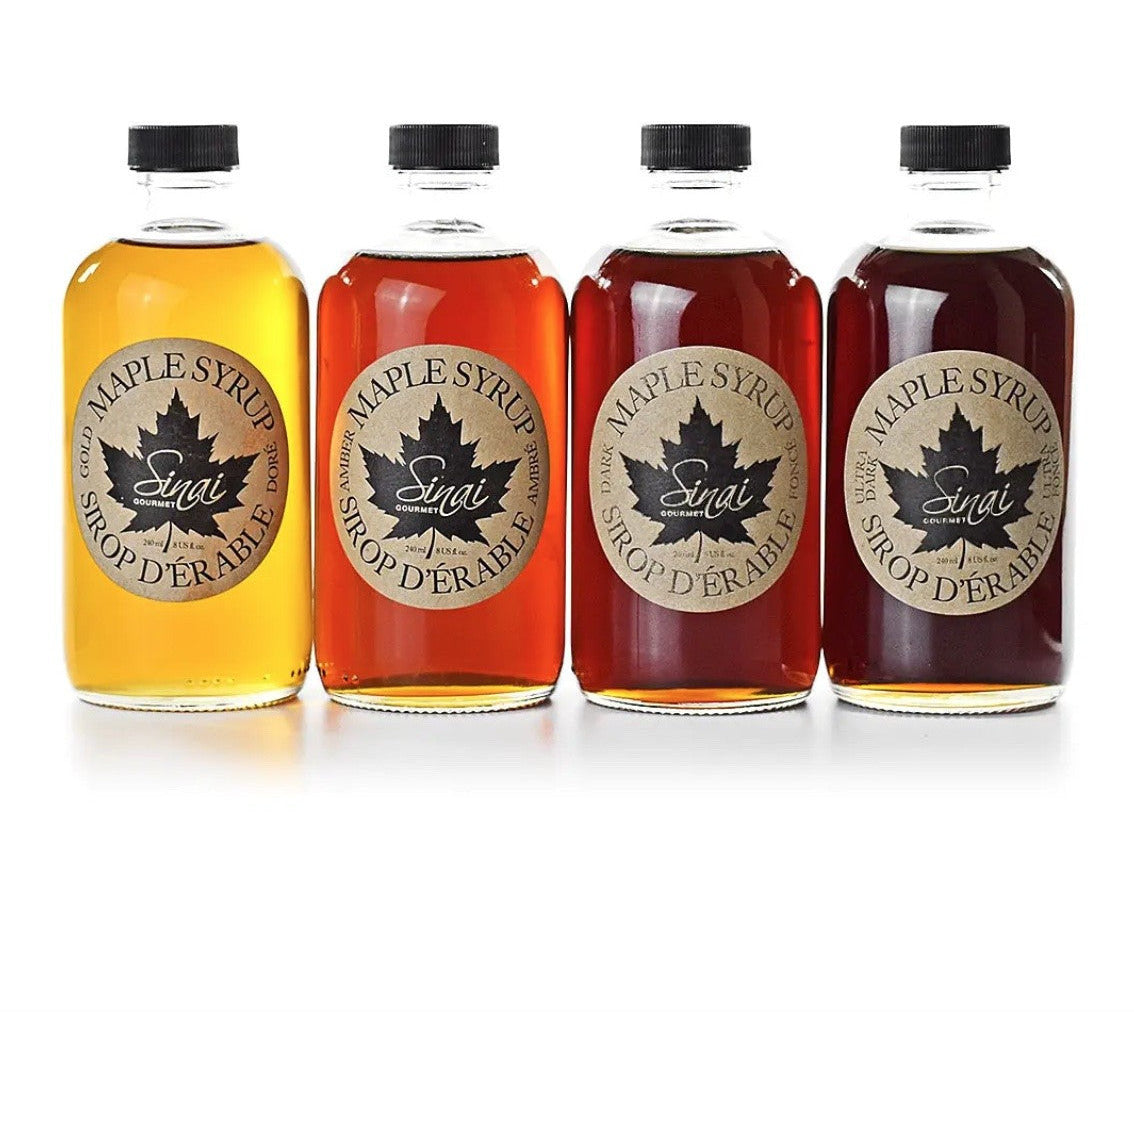 Pack of 4 Grade A - Real Canadian Maple Syrups - Gold - Amber - Dark - Ultradark